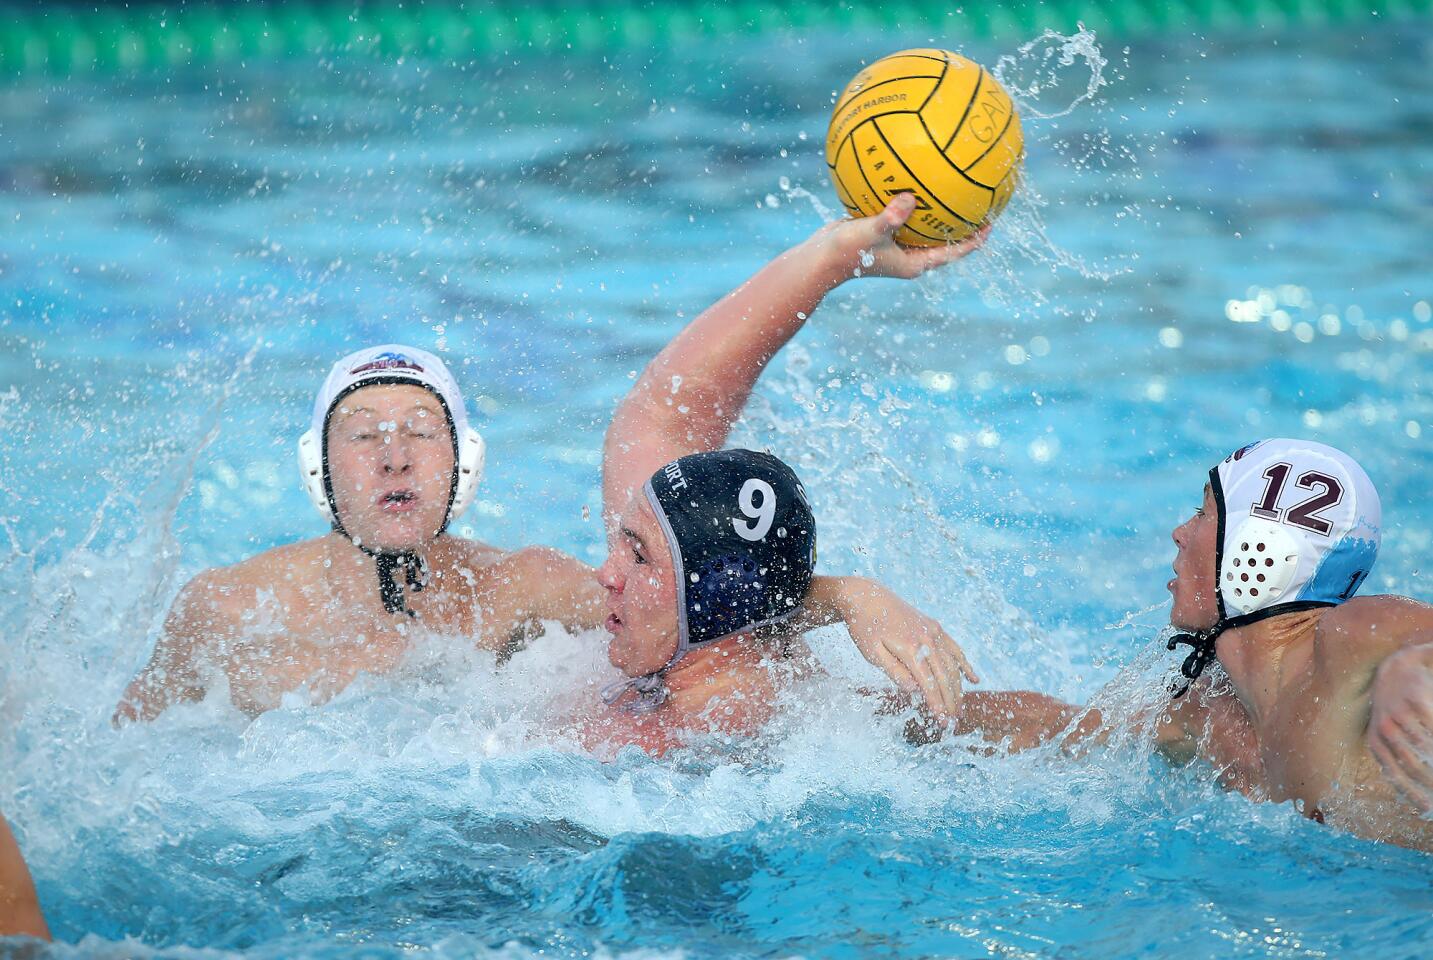 Newport Harbor's Ike Love is turns and shoots for a score despite the tight defense by Laguna Beach during the opening round of the CIF Southern Section Division 1 playoffs on Thursday at Newport Harbor.